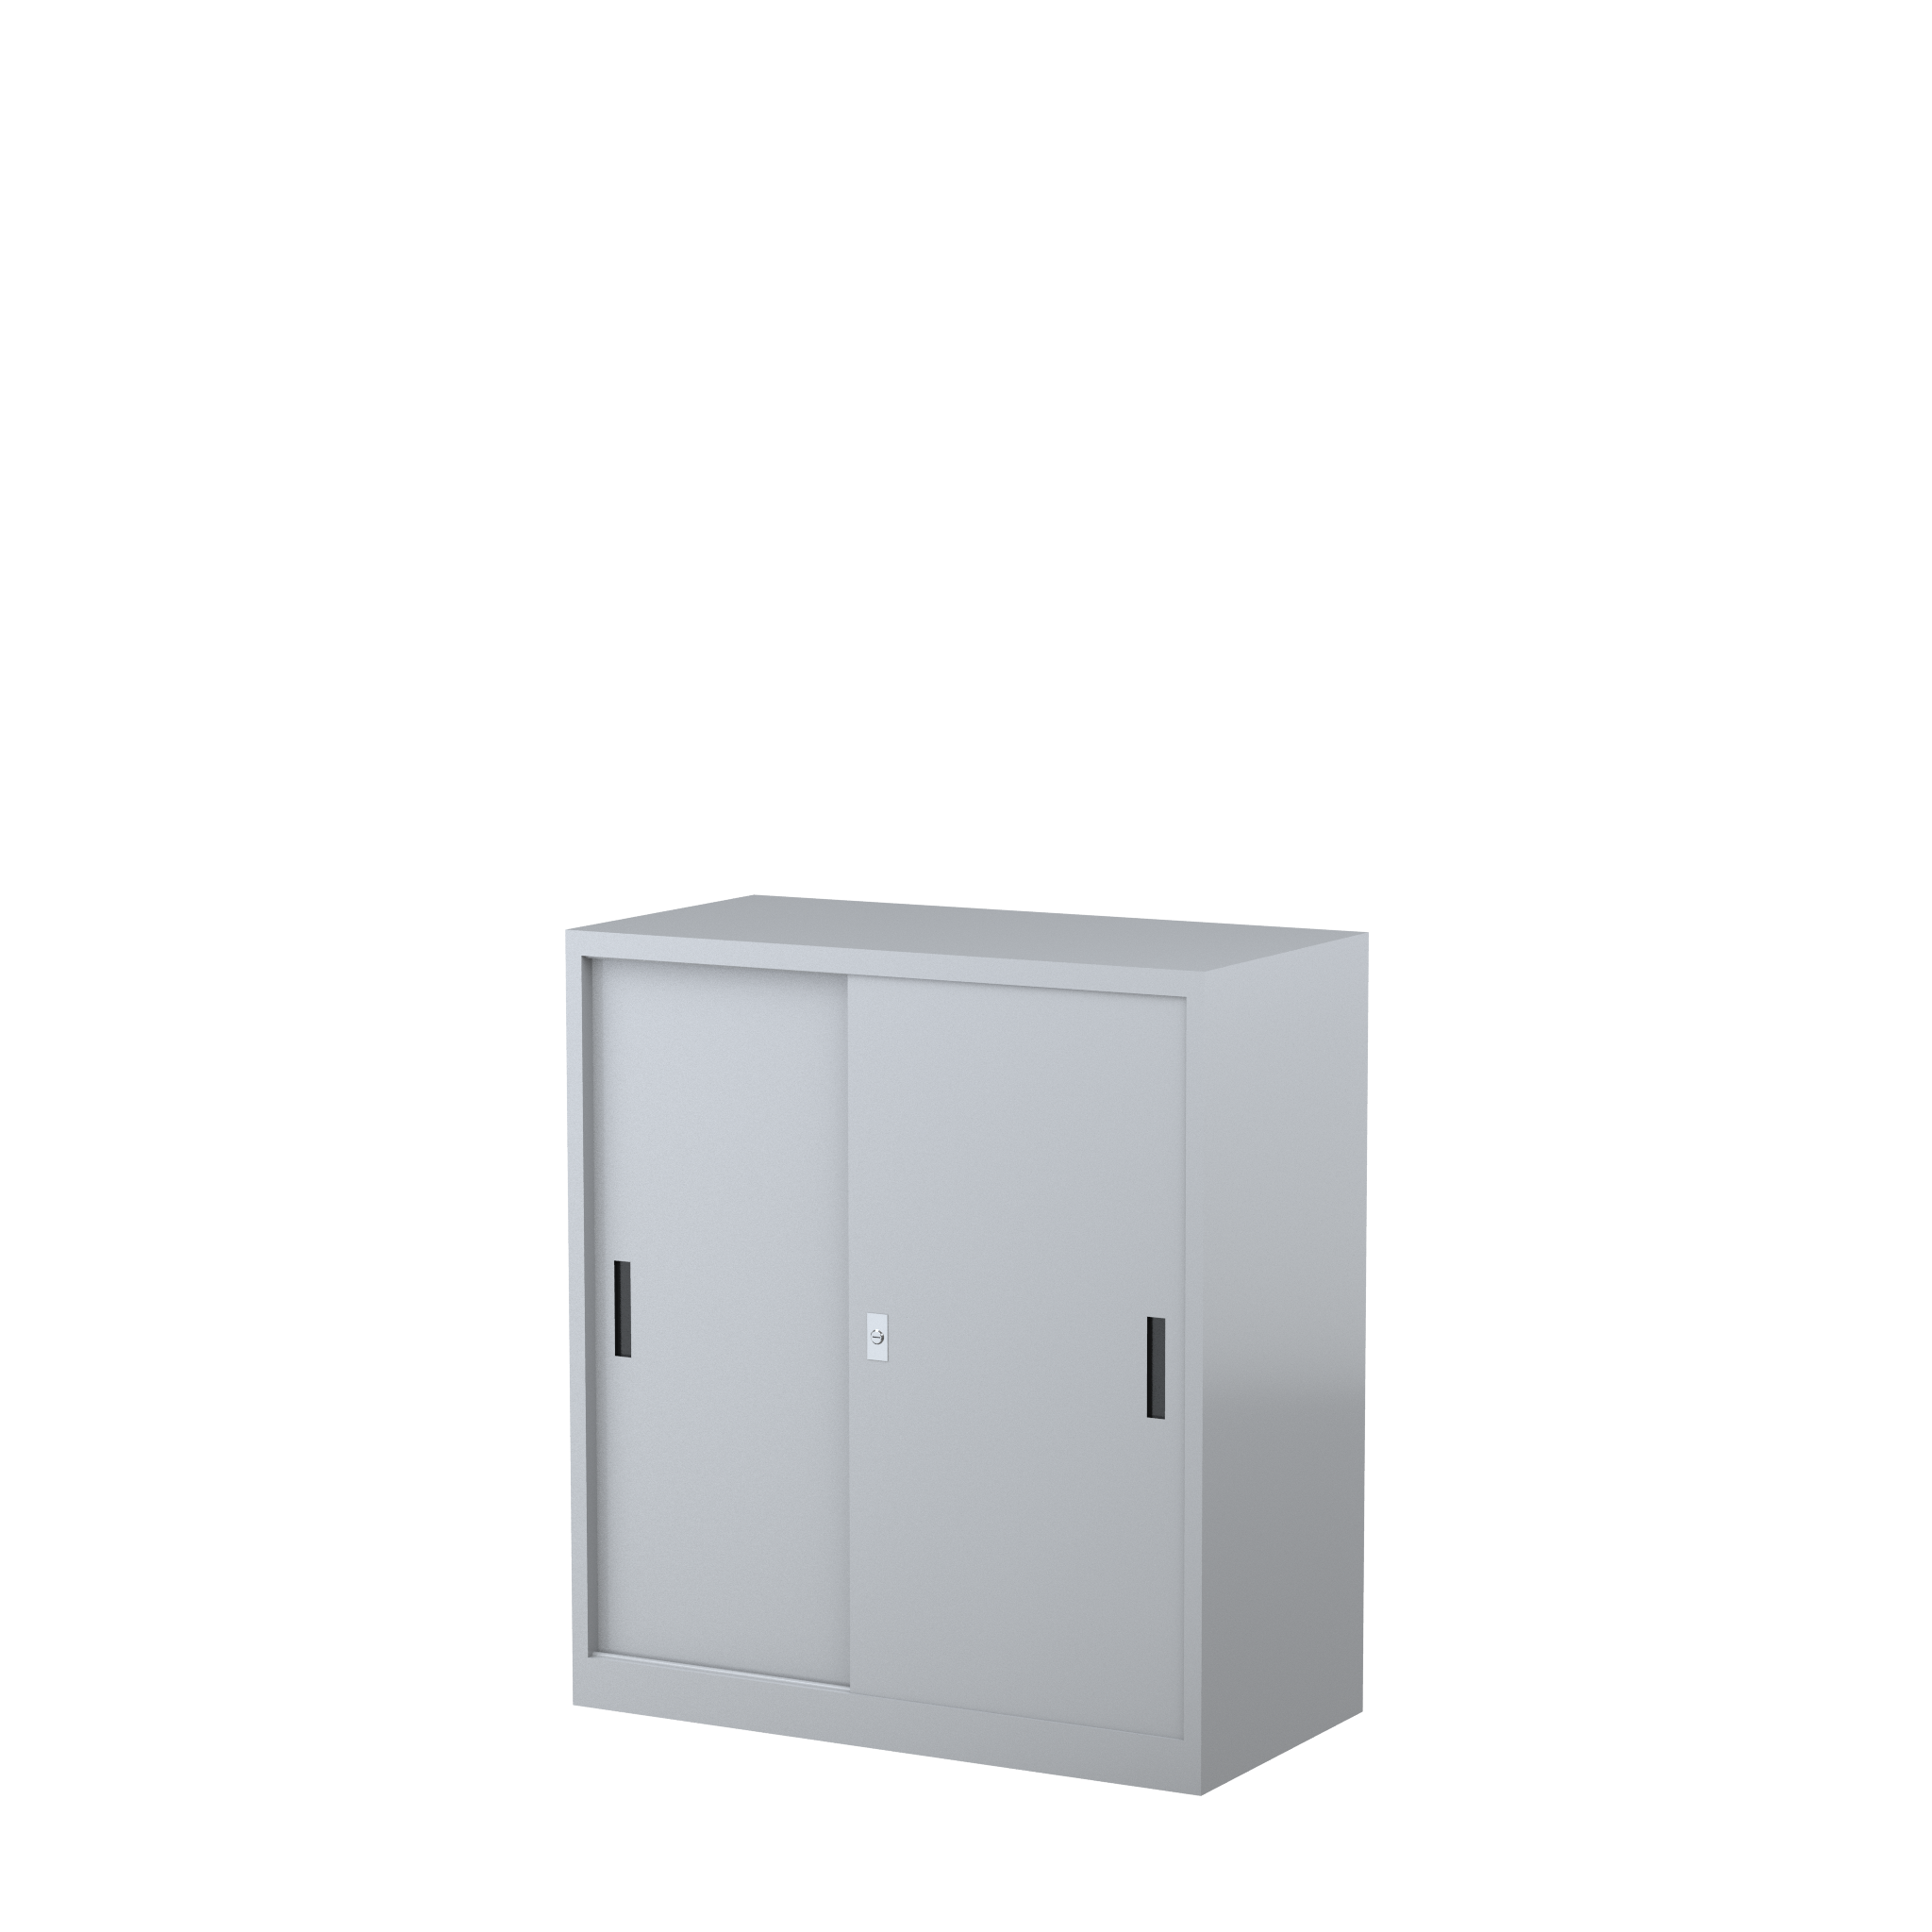 SD1015_914 - STEELCO SS Cabinet 1015H x 914W x 465D - 2 Shelves-SG.png